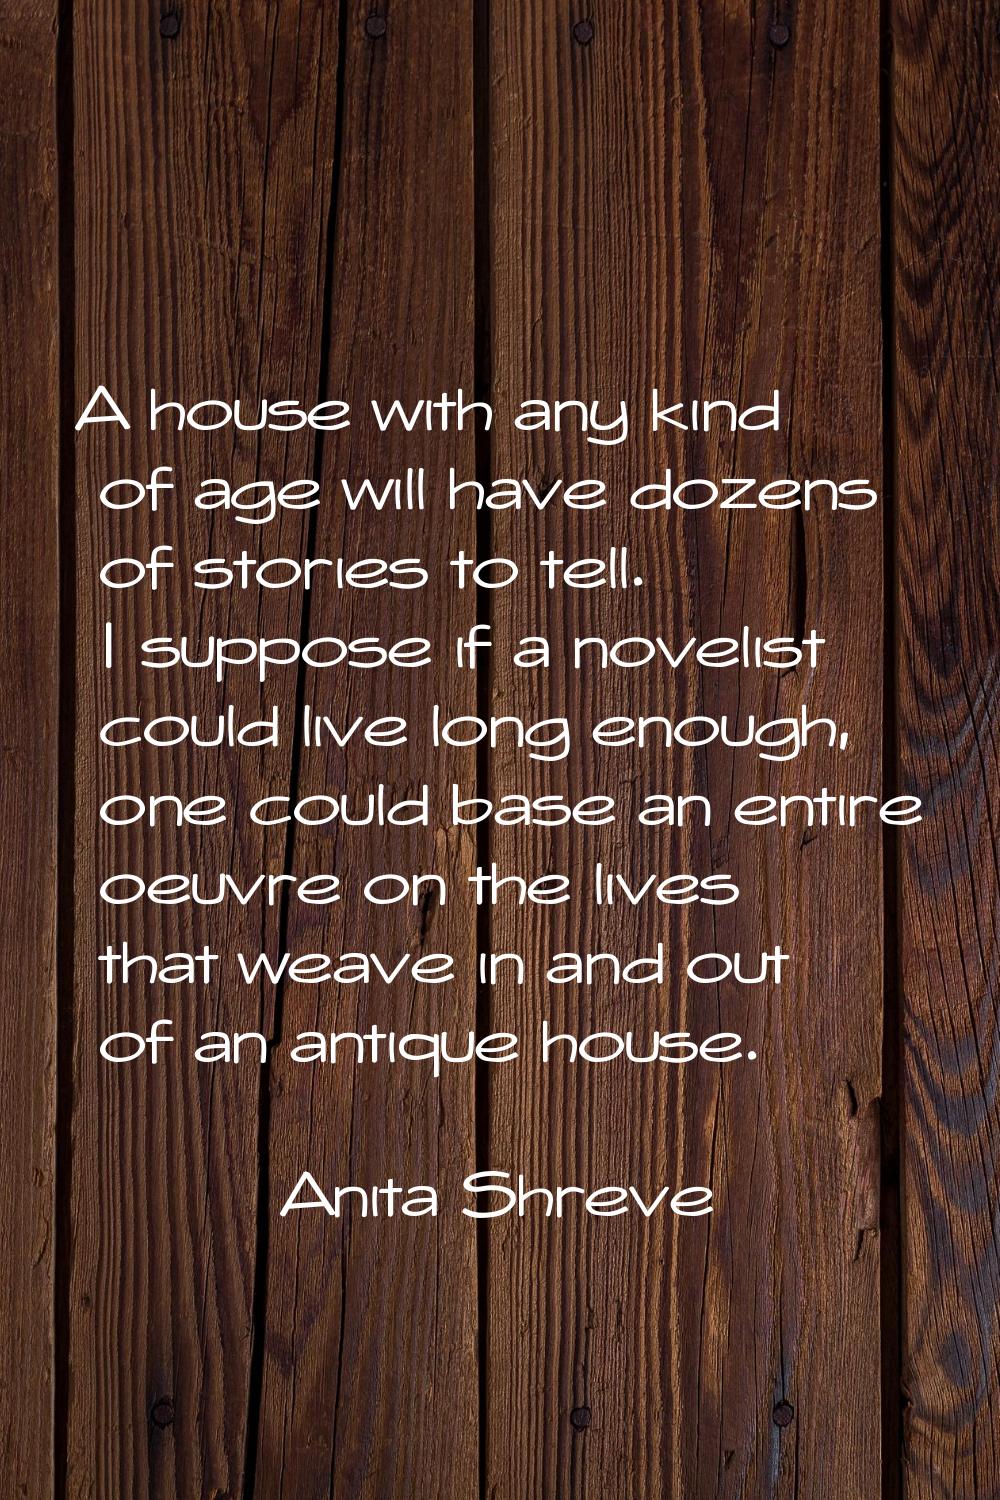 A house with any kind of age will have dozens of stories to tell. I suppose if a novelist could liv